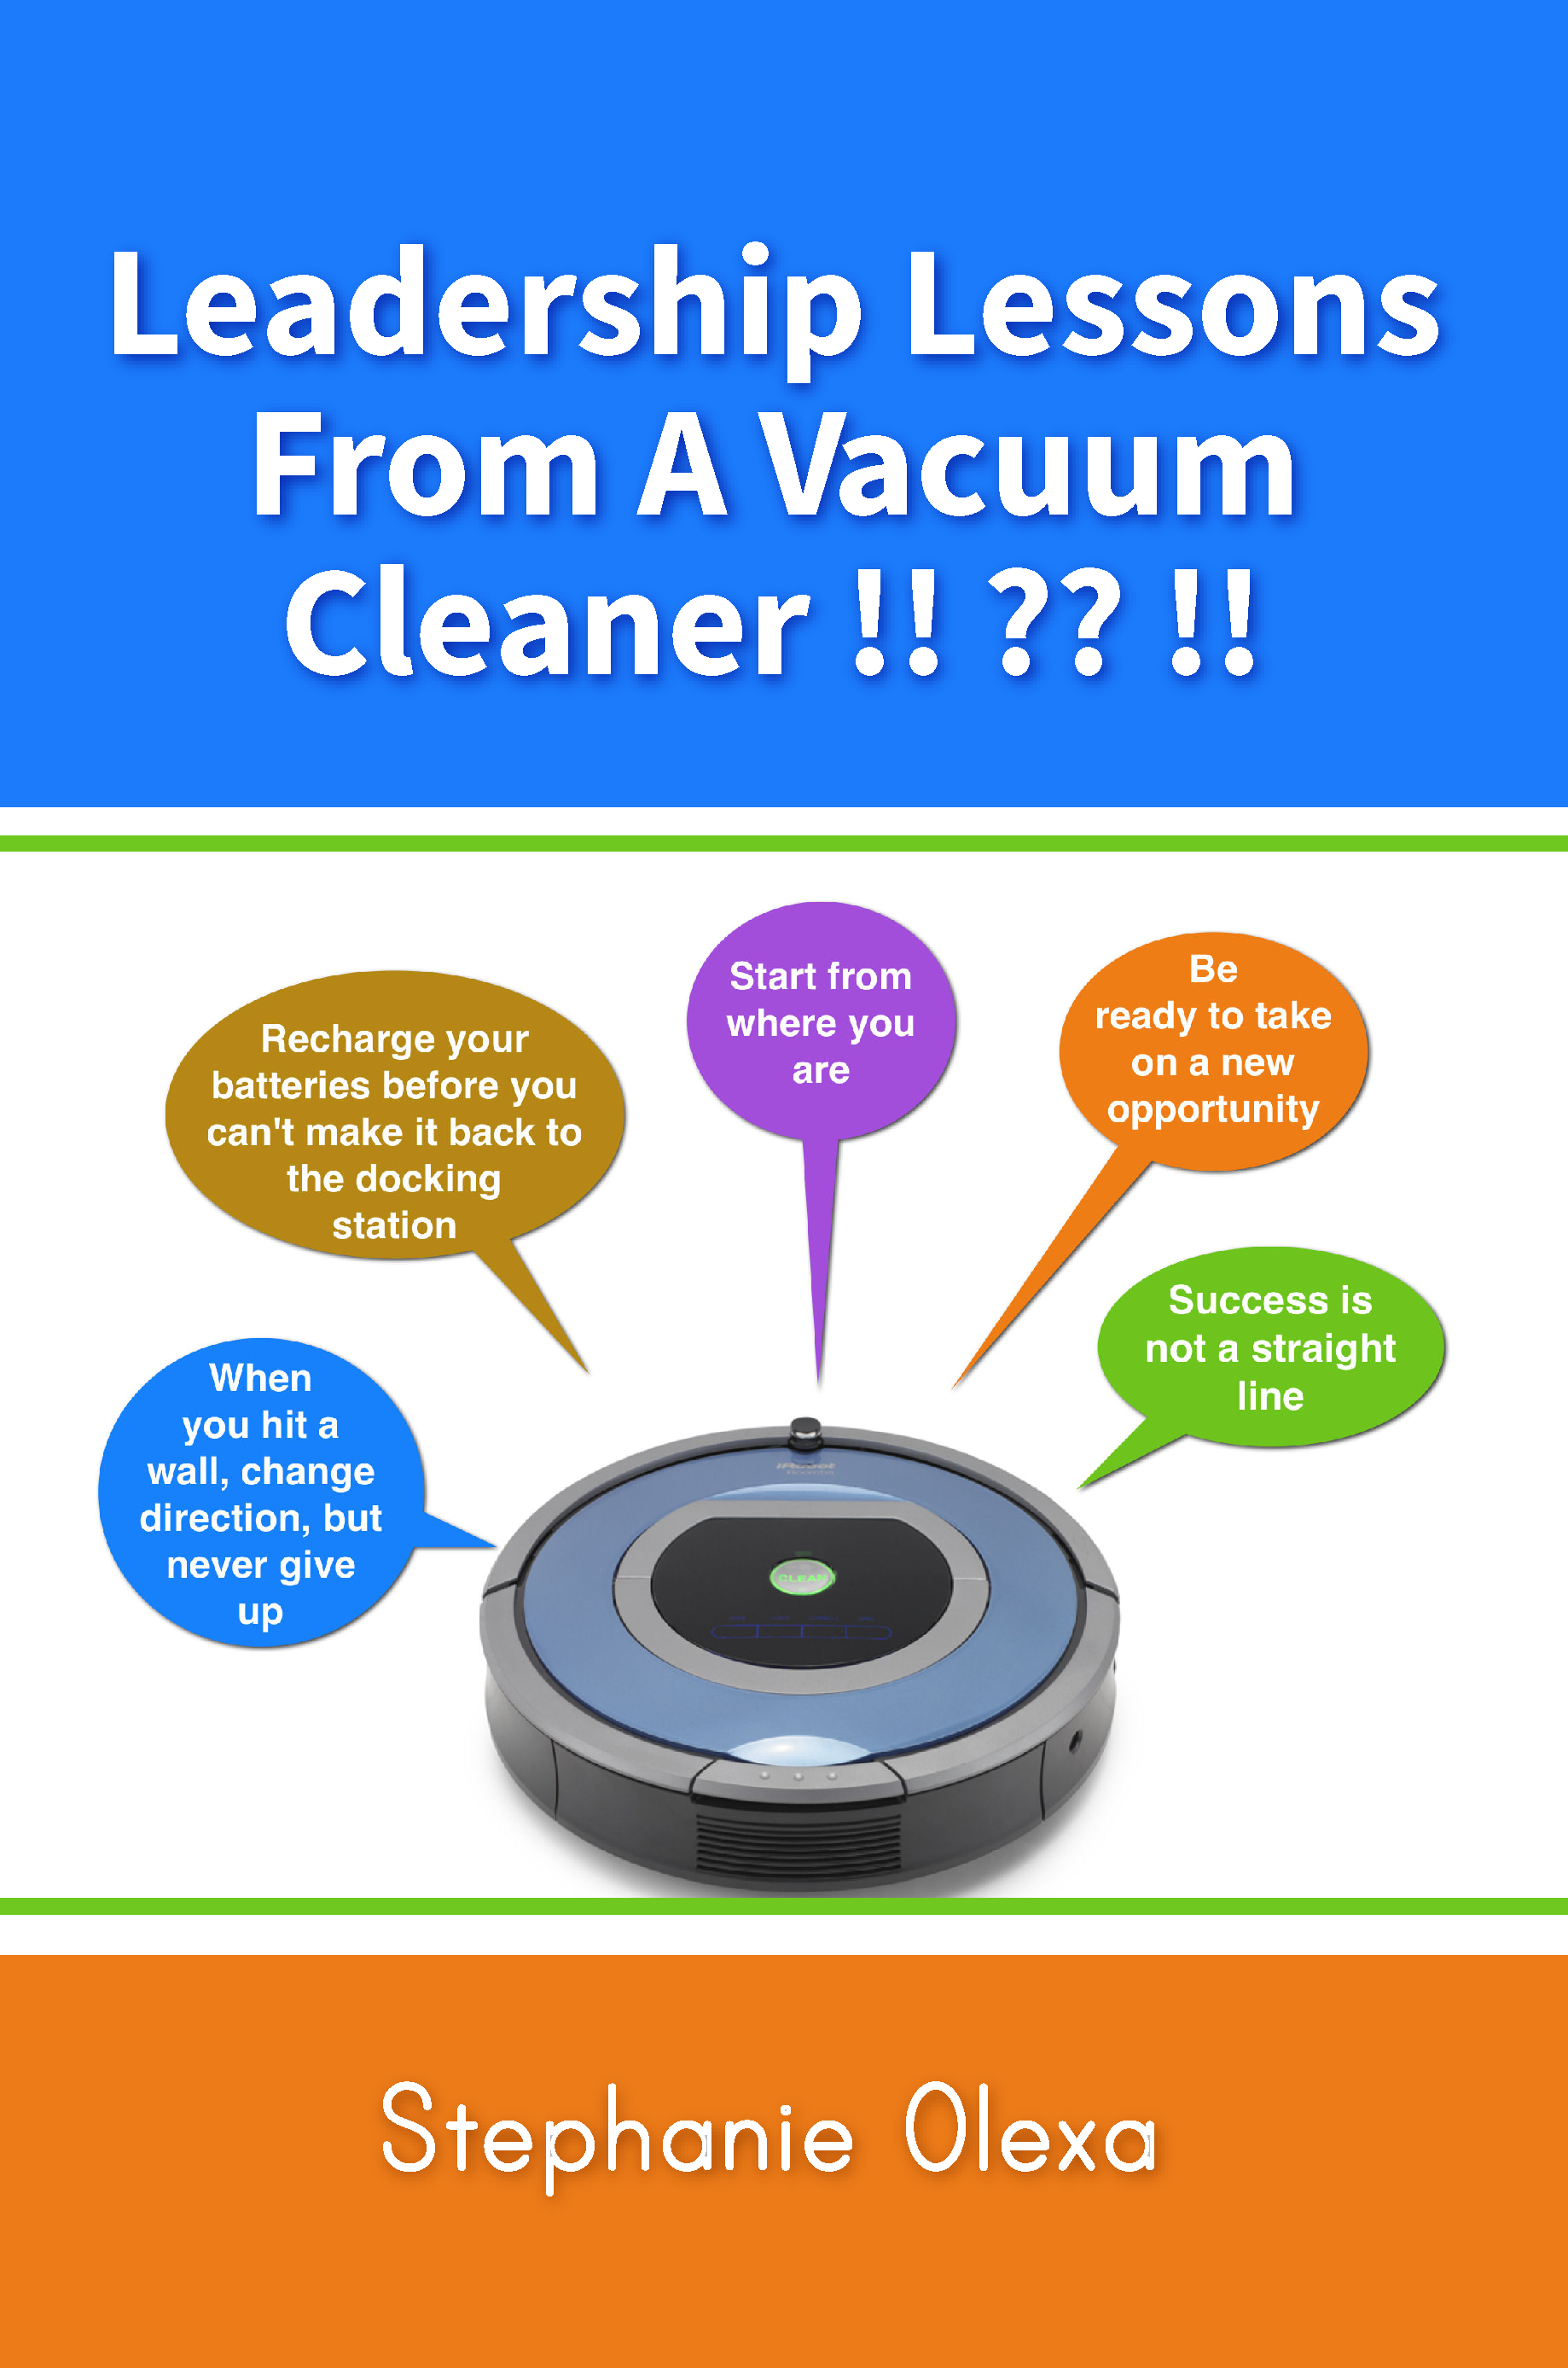 Leadership-Lessons-From-A-Vacuum-Cleaner